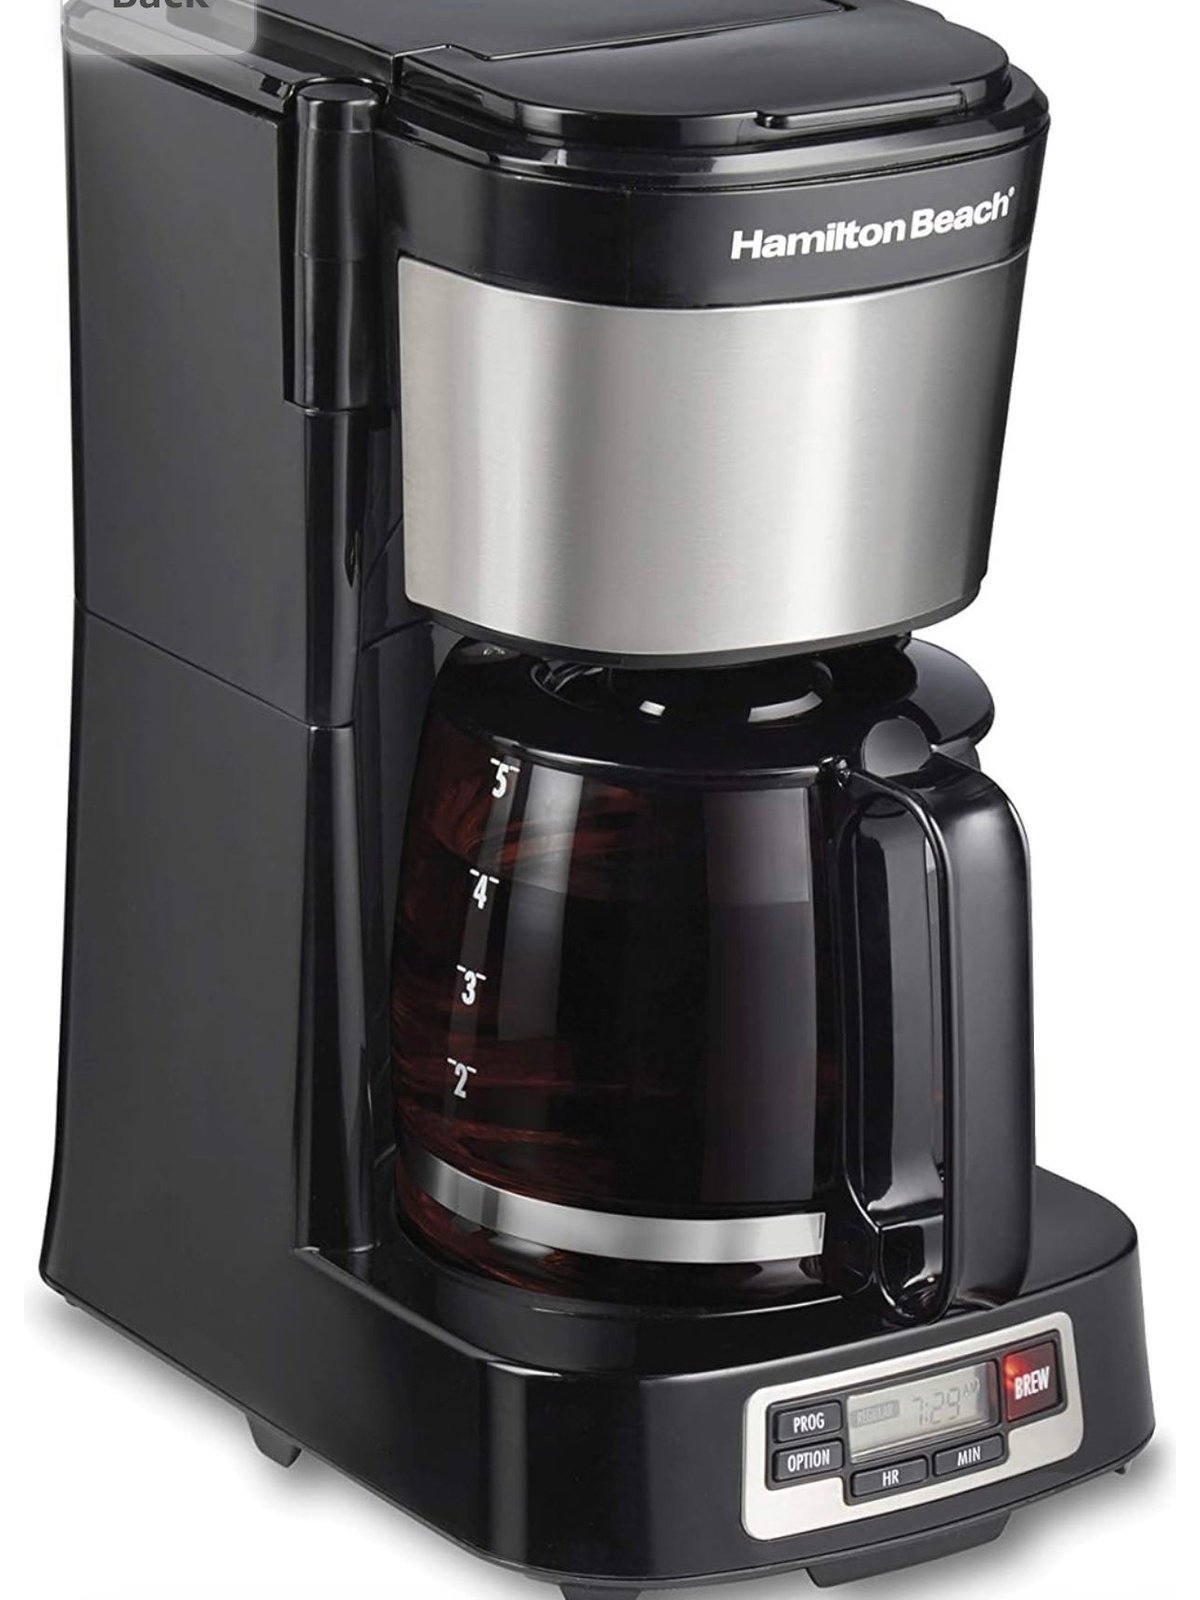 Hamilton Beach 5 Cup Compact Drip Coffee Maker with Programmable Clock, Glass Carafe, Auto Pause and Pour, Black & Stainless Steel (46111)